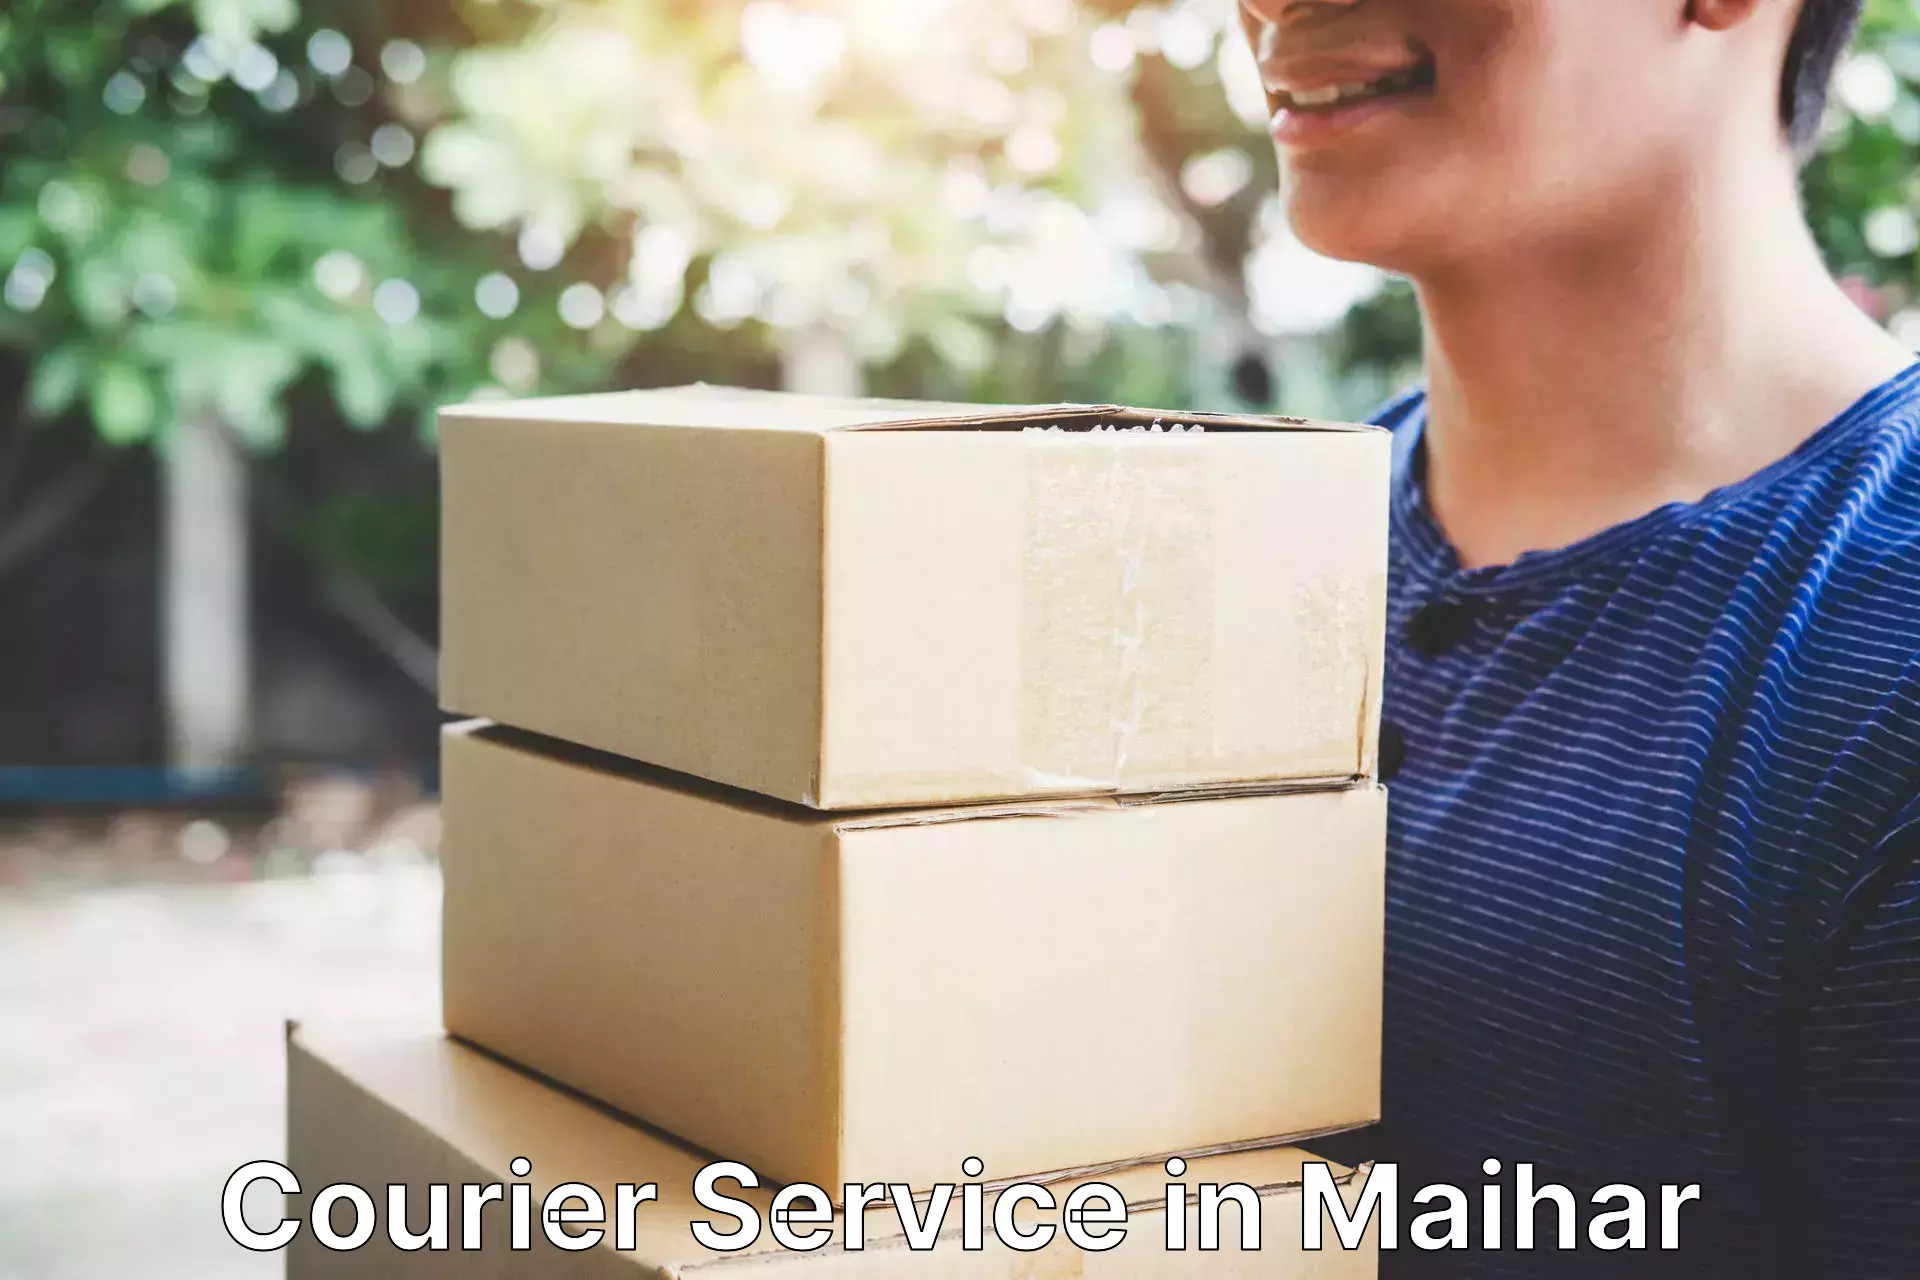 Trackable shipping service in Maihar